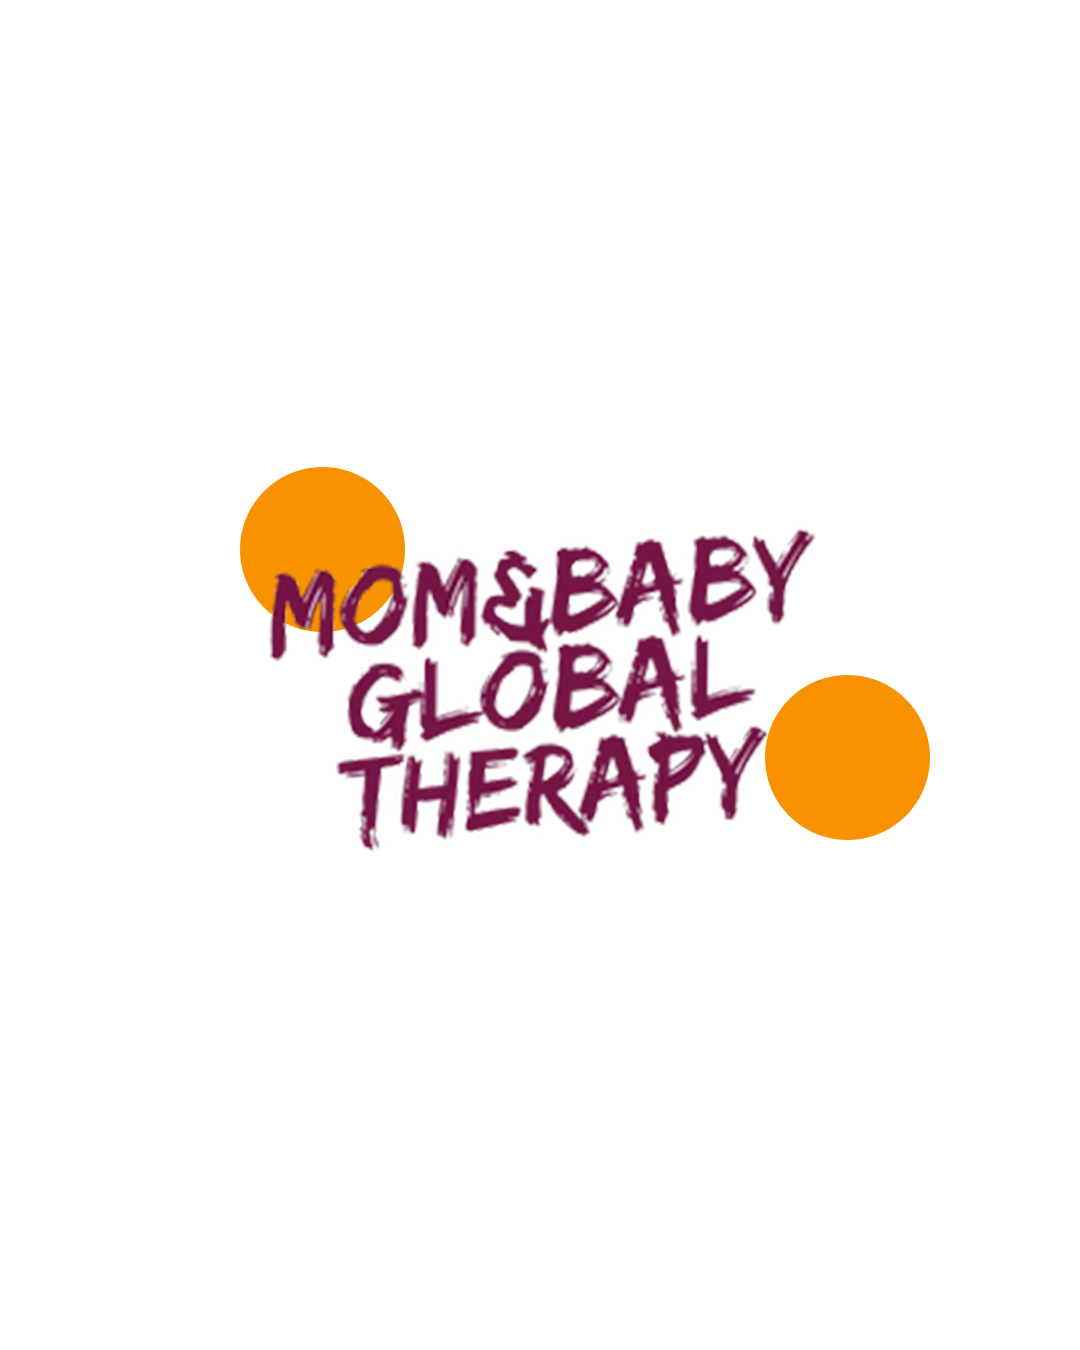 Baby Global Therapy